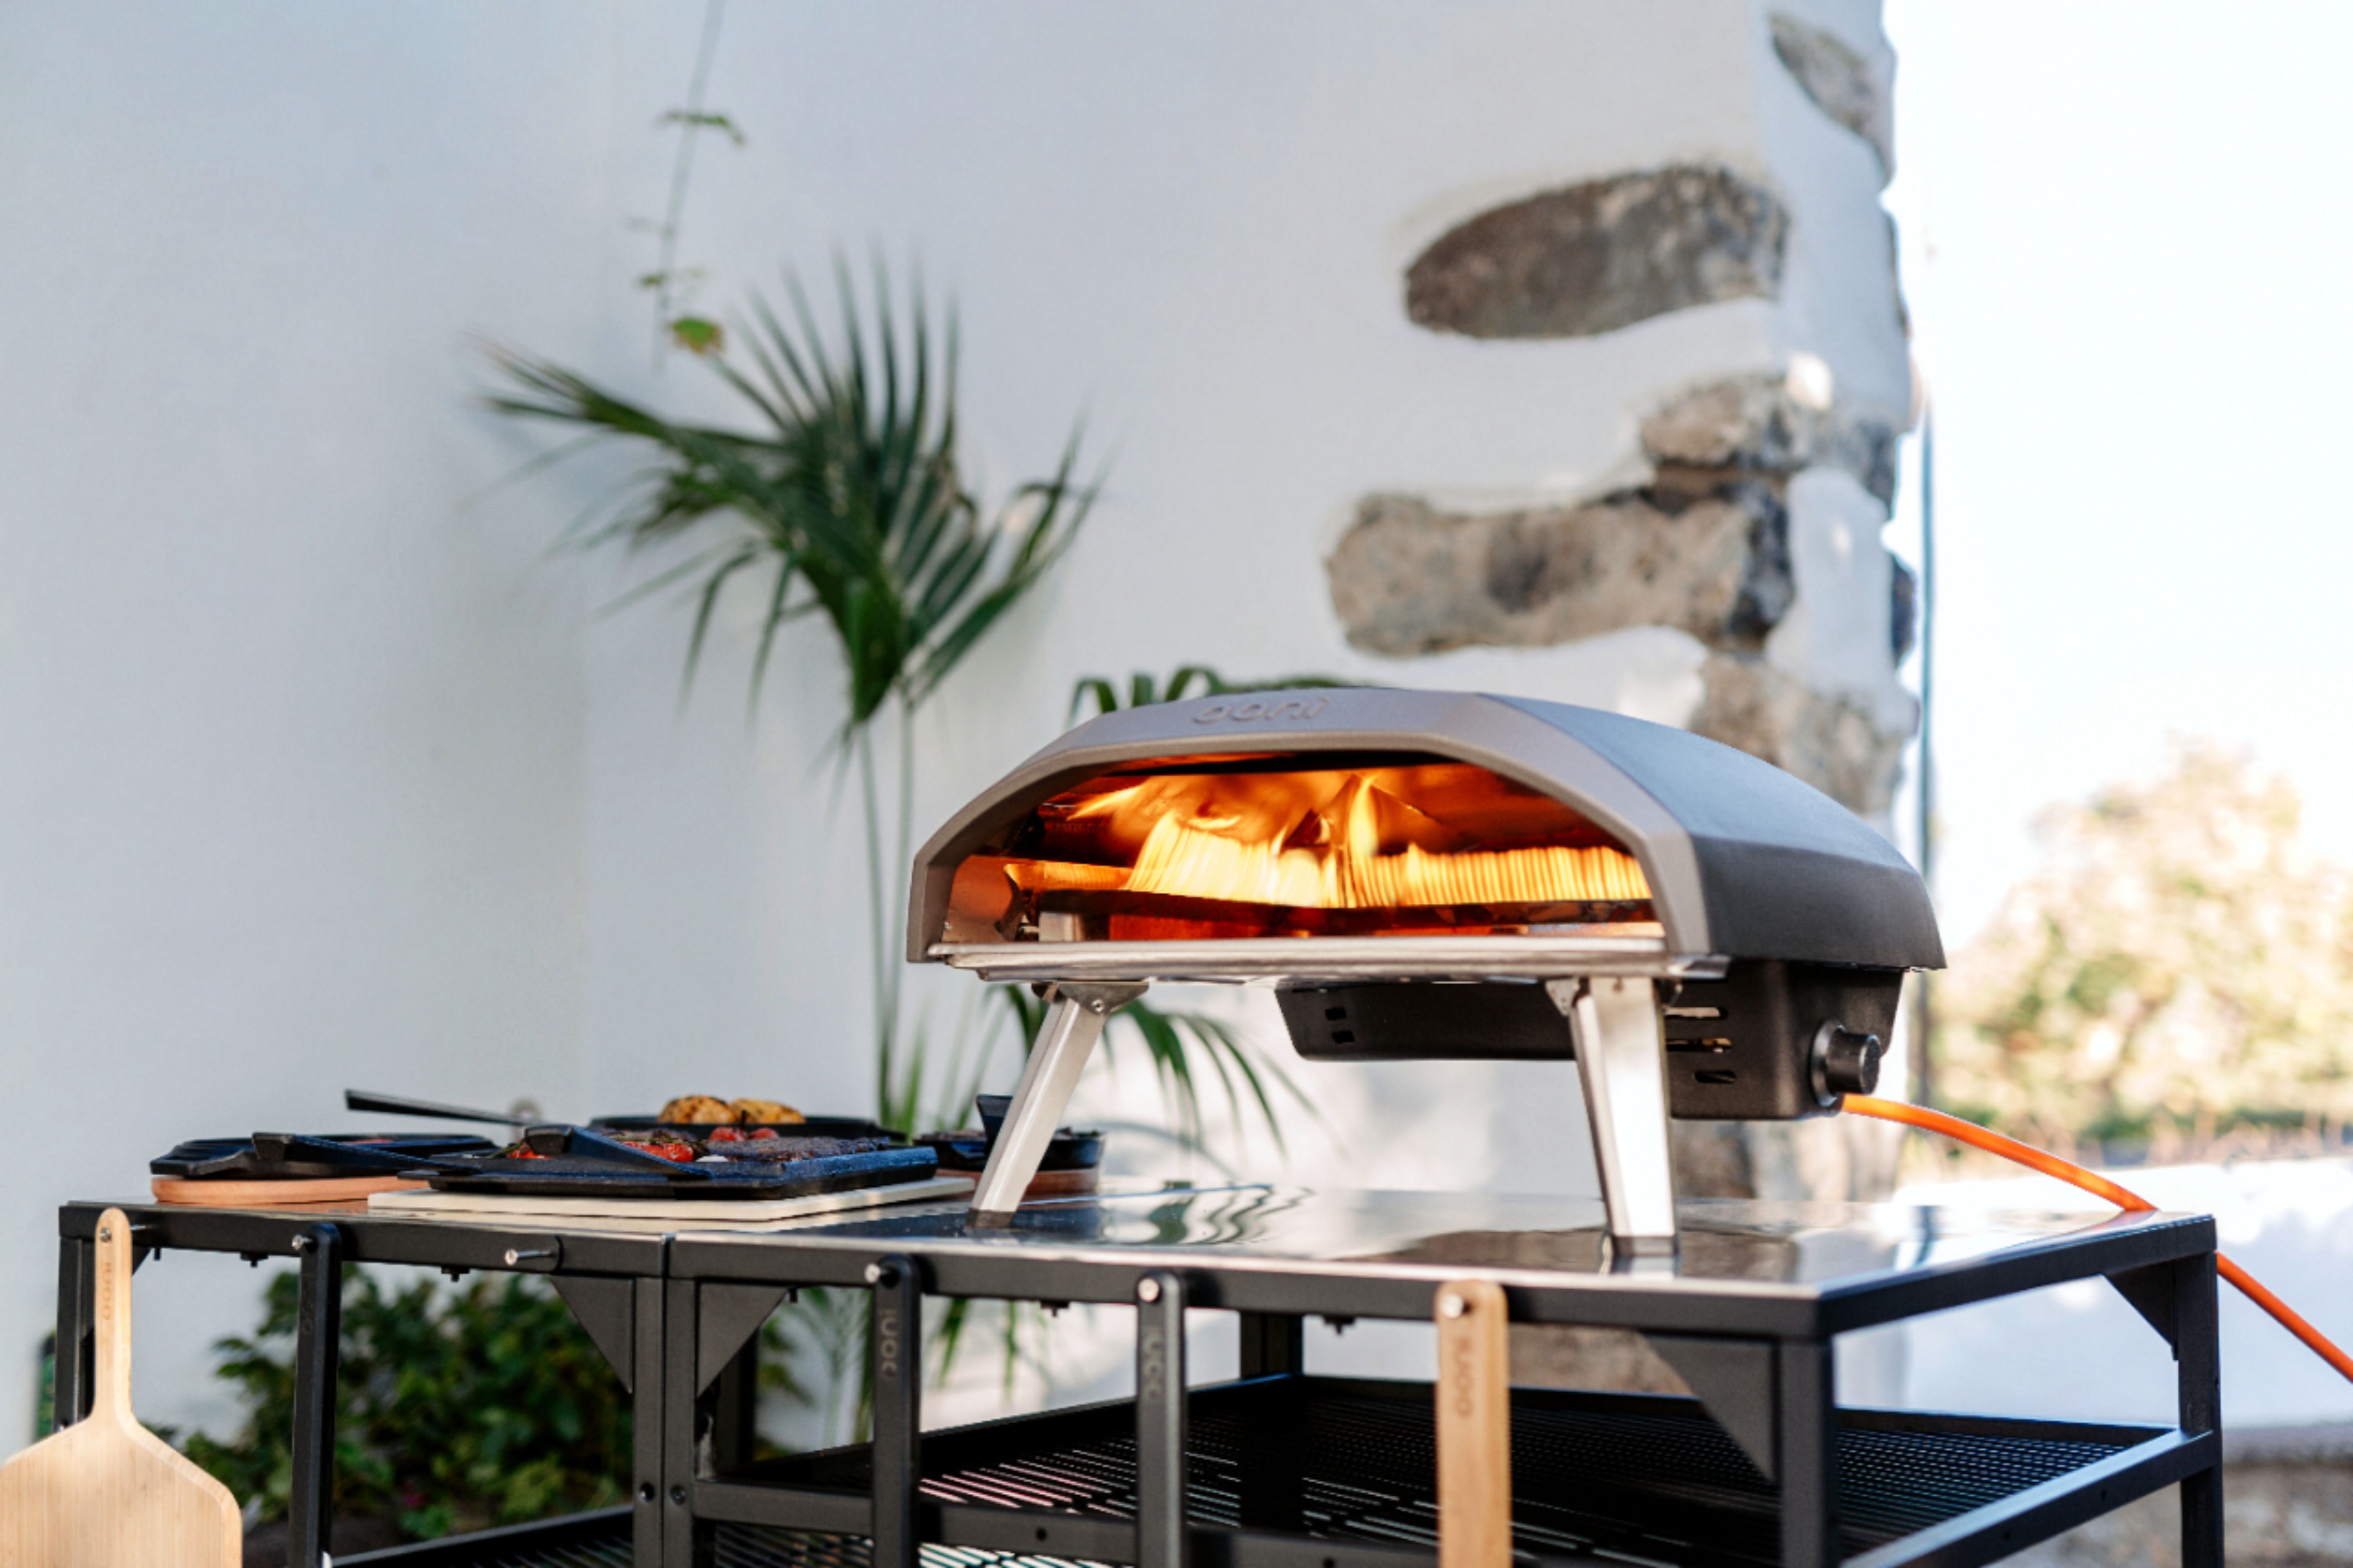 Ooni deals: This popular outdoor pizza oven is on sale for under